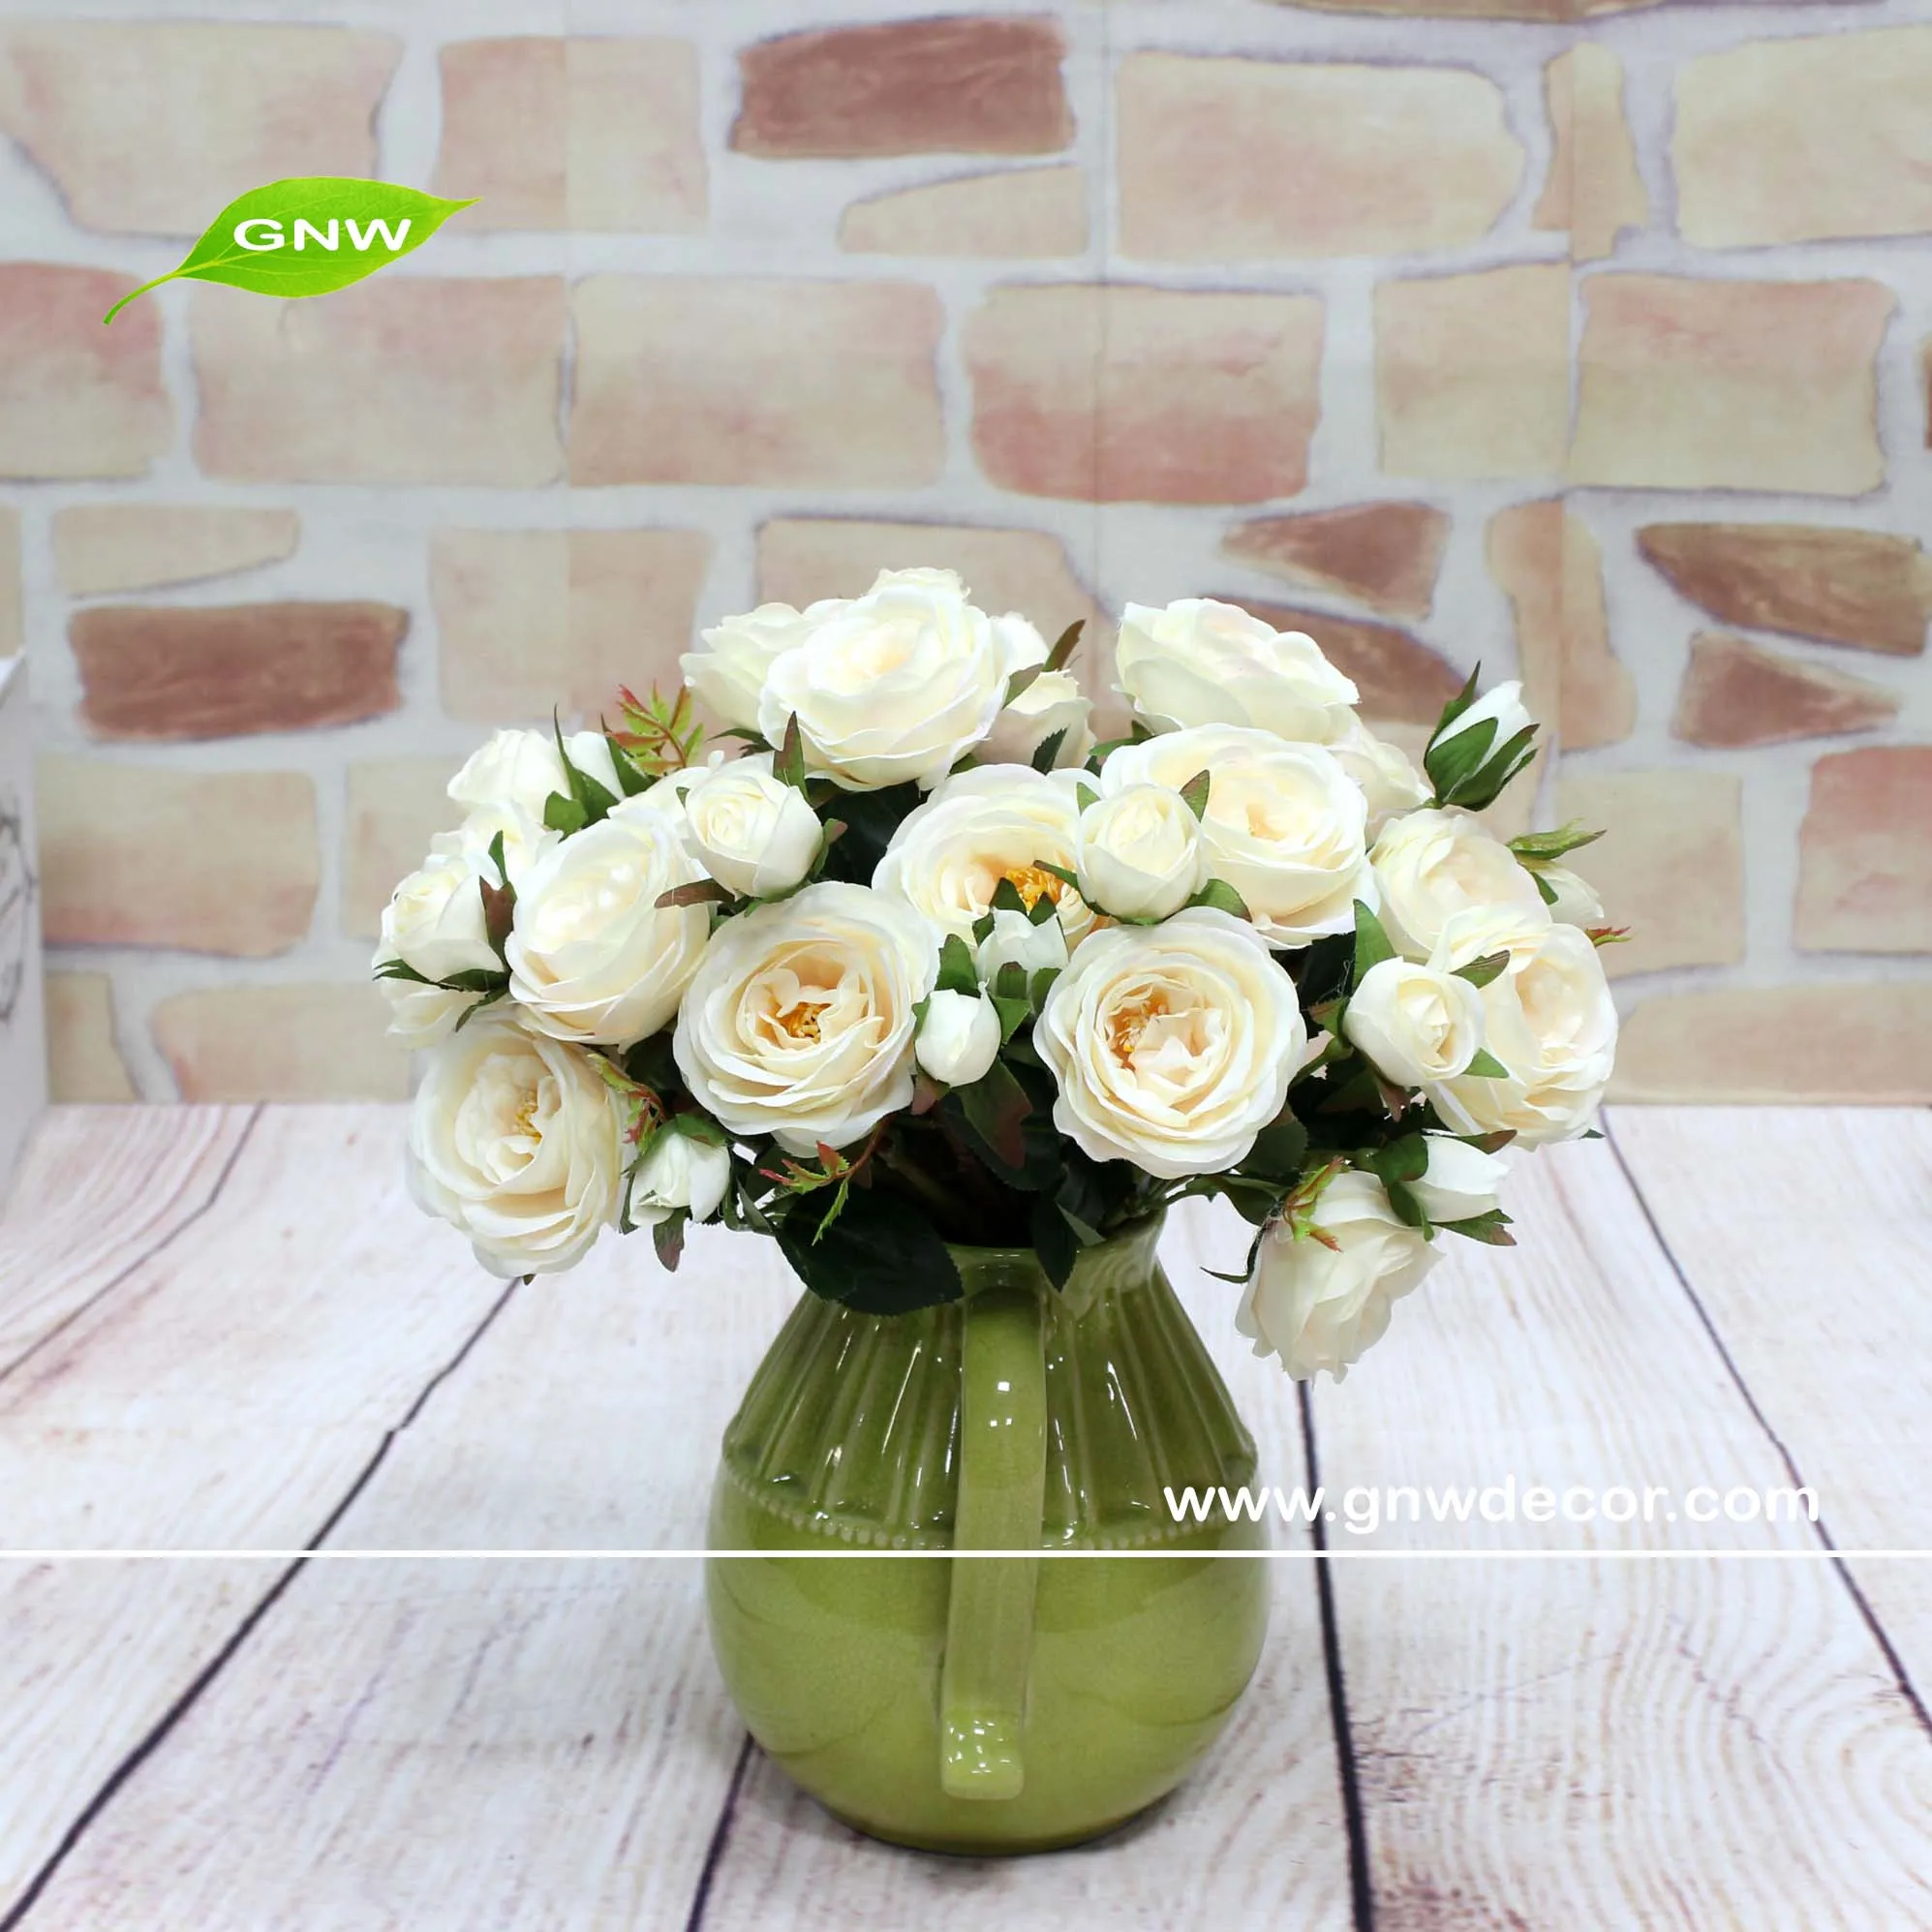 Gnw Beautiful Flowers For Table Vase Buy Single Flowers Table Vase Flowers Flower Vases Product On Alibaba Com,Ikea Hack Learning Tower